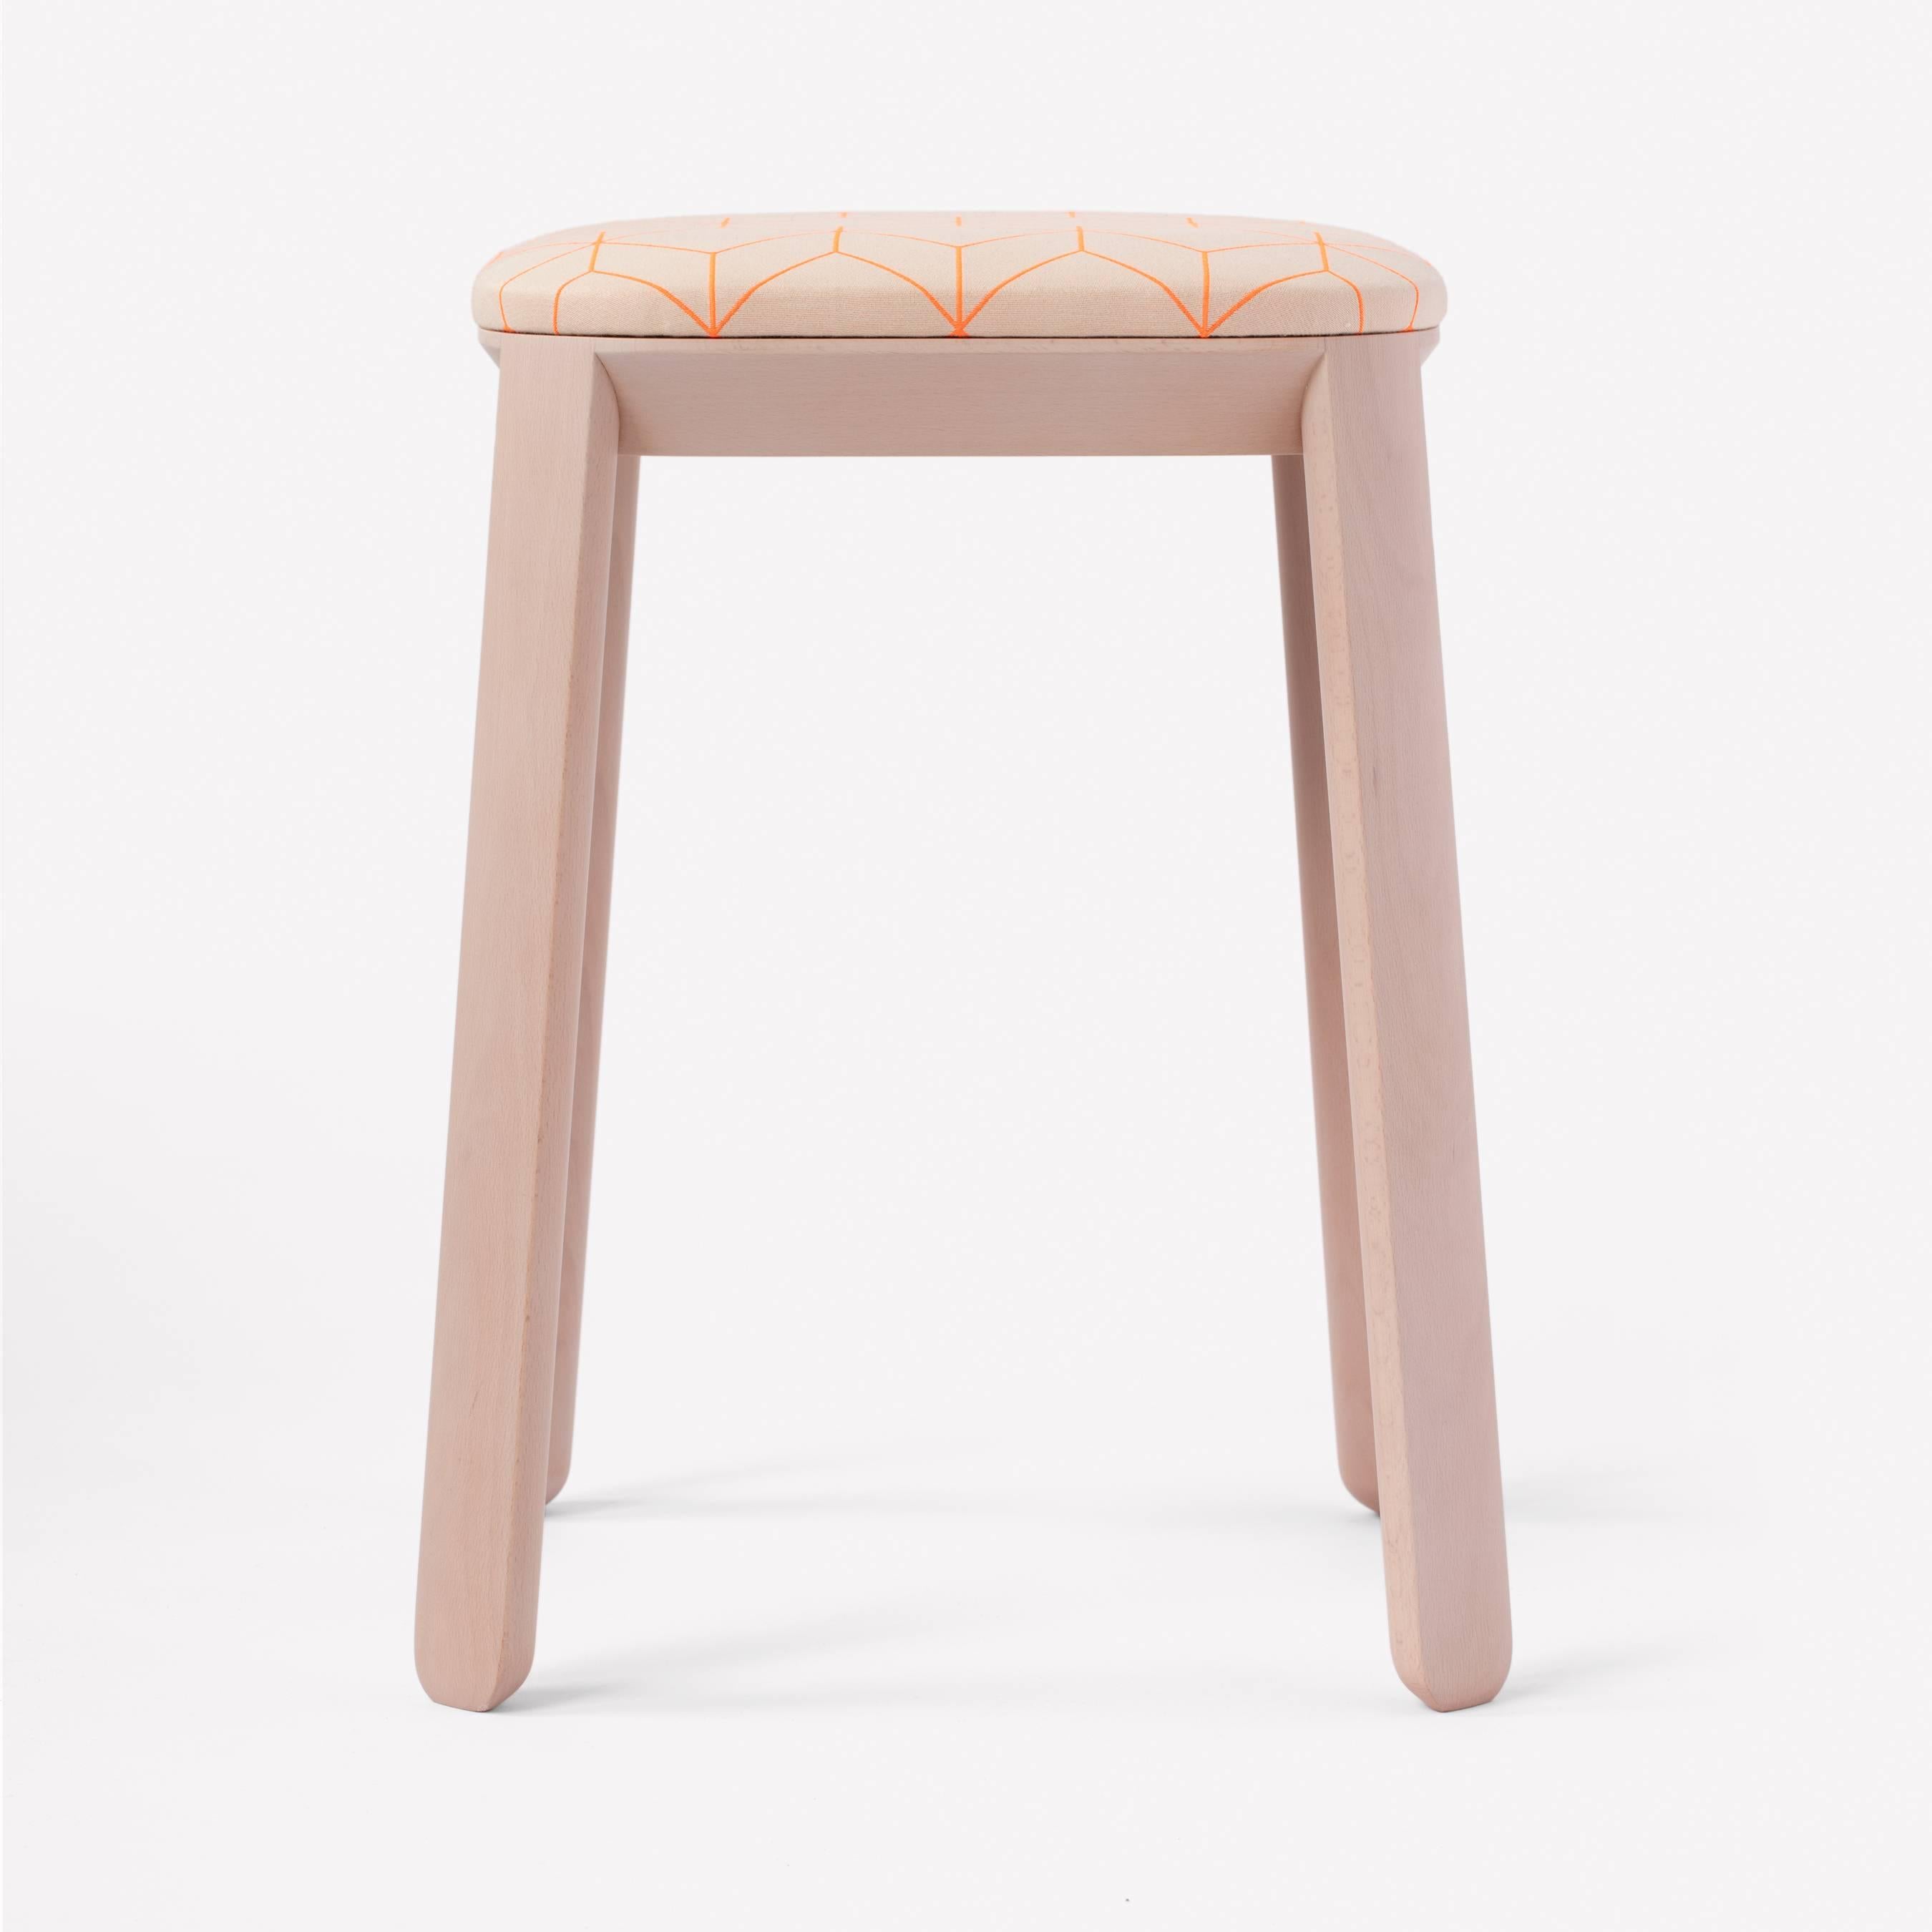 Covered Stool by Scholten & Baijings
Bright Cube by Scholten & Baijings
102 Crush

Tinted beechwood base with Bright Cube textile. Stackable. Made in Japan by Karimoku New Standard.

Scholten & Baijings for Maharam is a collection of home goods and